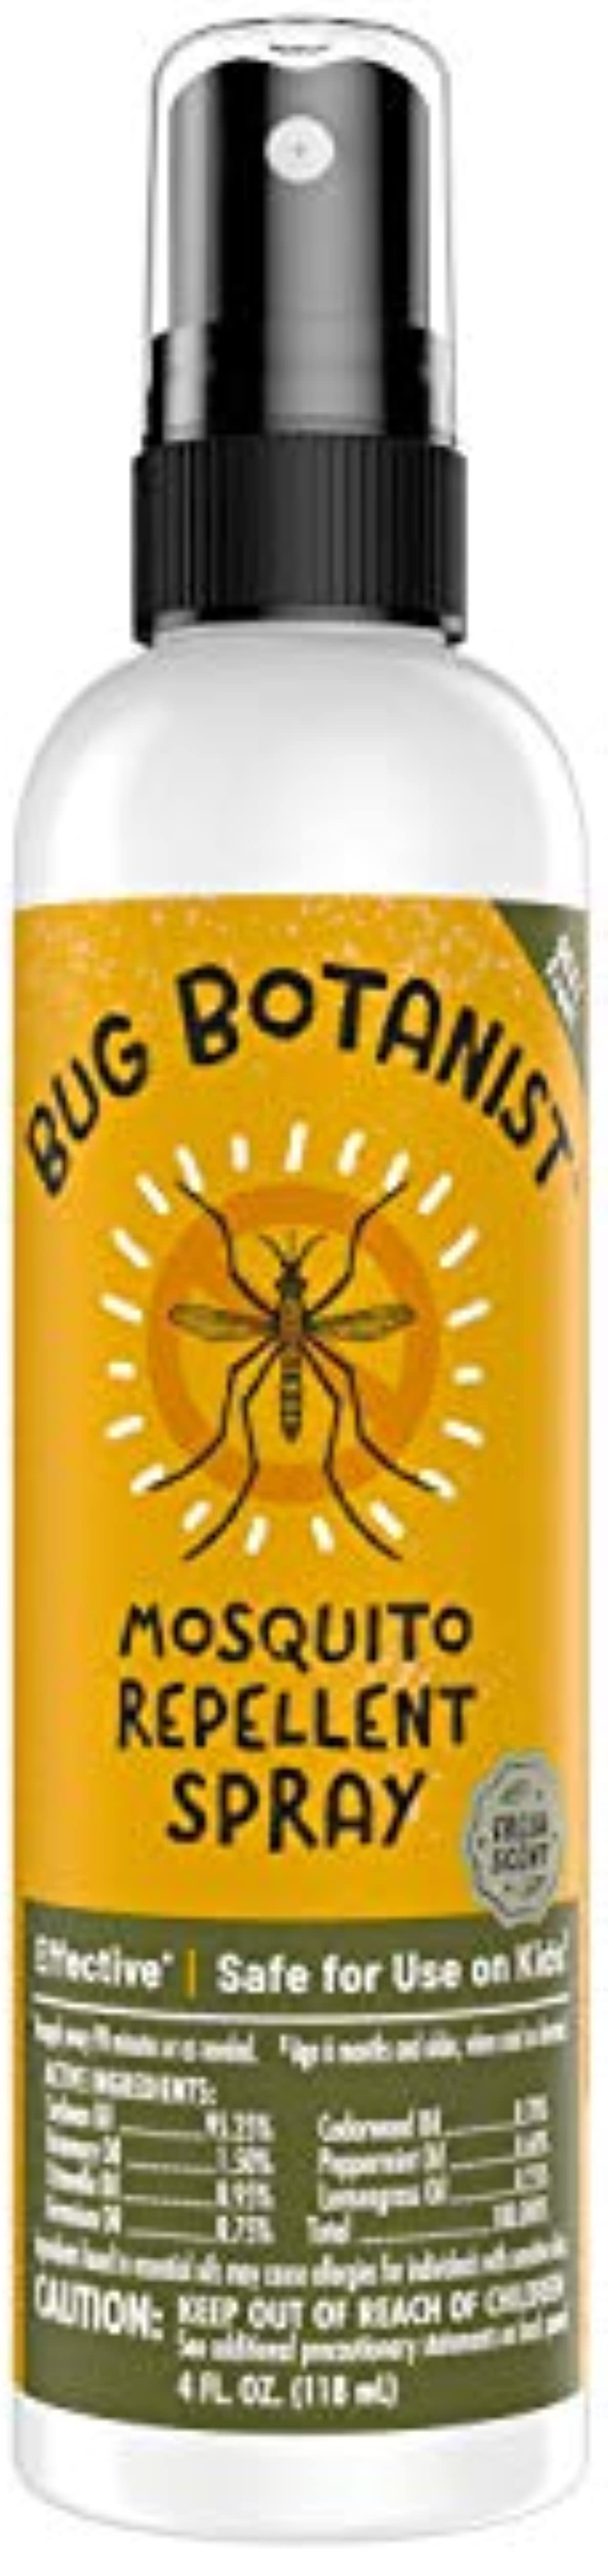 Bug Botanist Mosquito Repellent Spray: Mosquito Repellent with Essential Oils, Family Friendly, 4oz Bottle